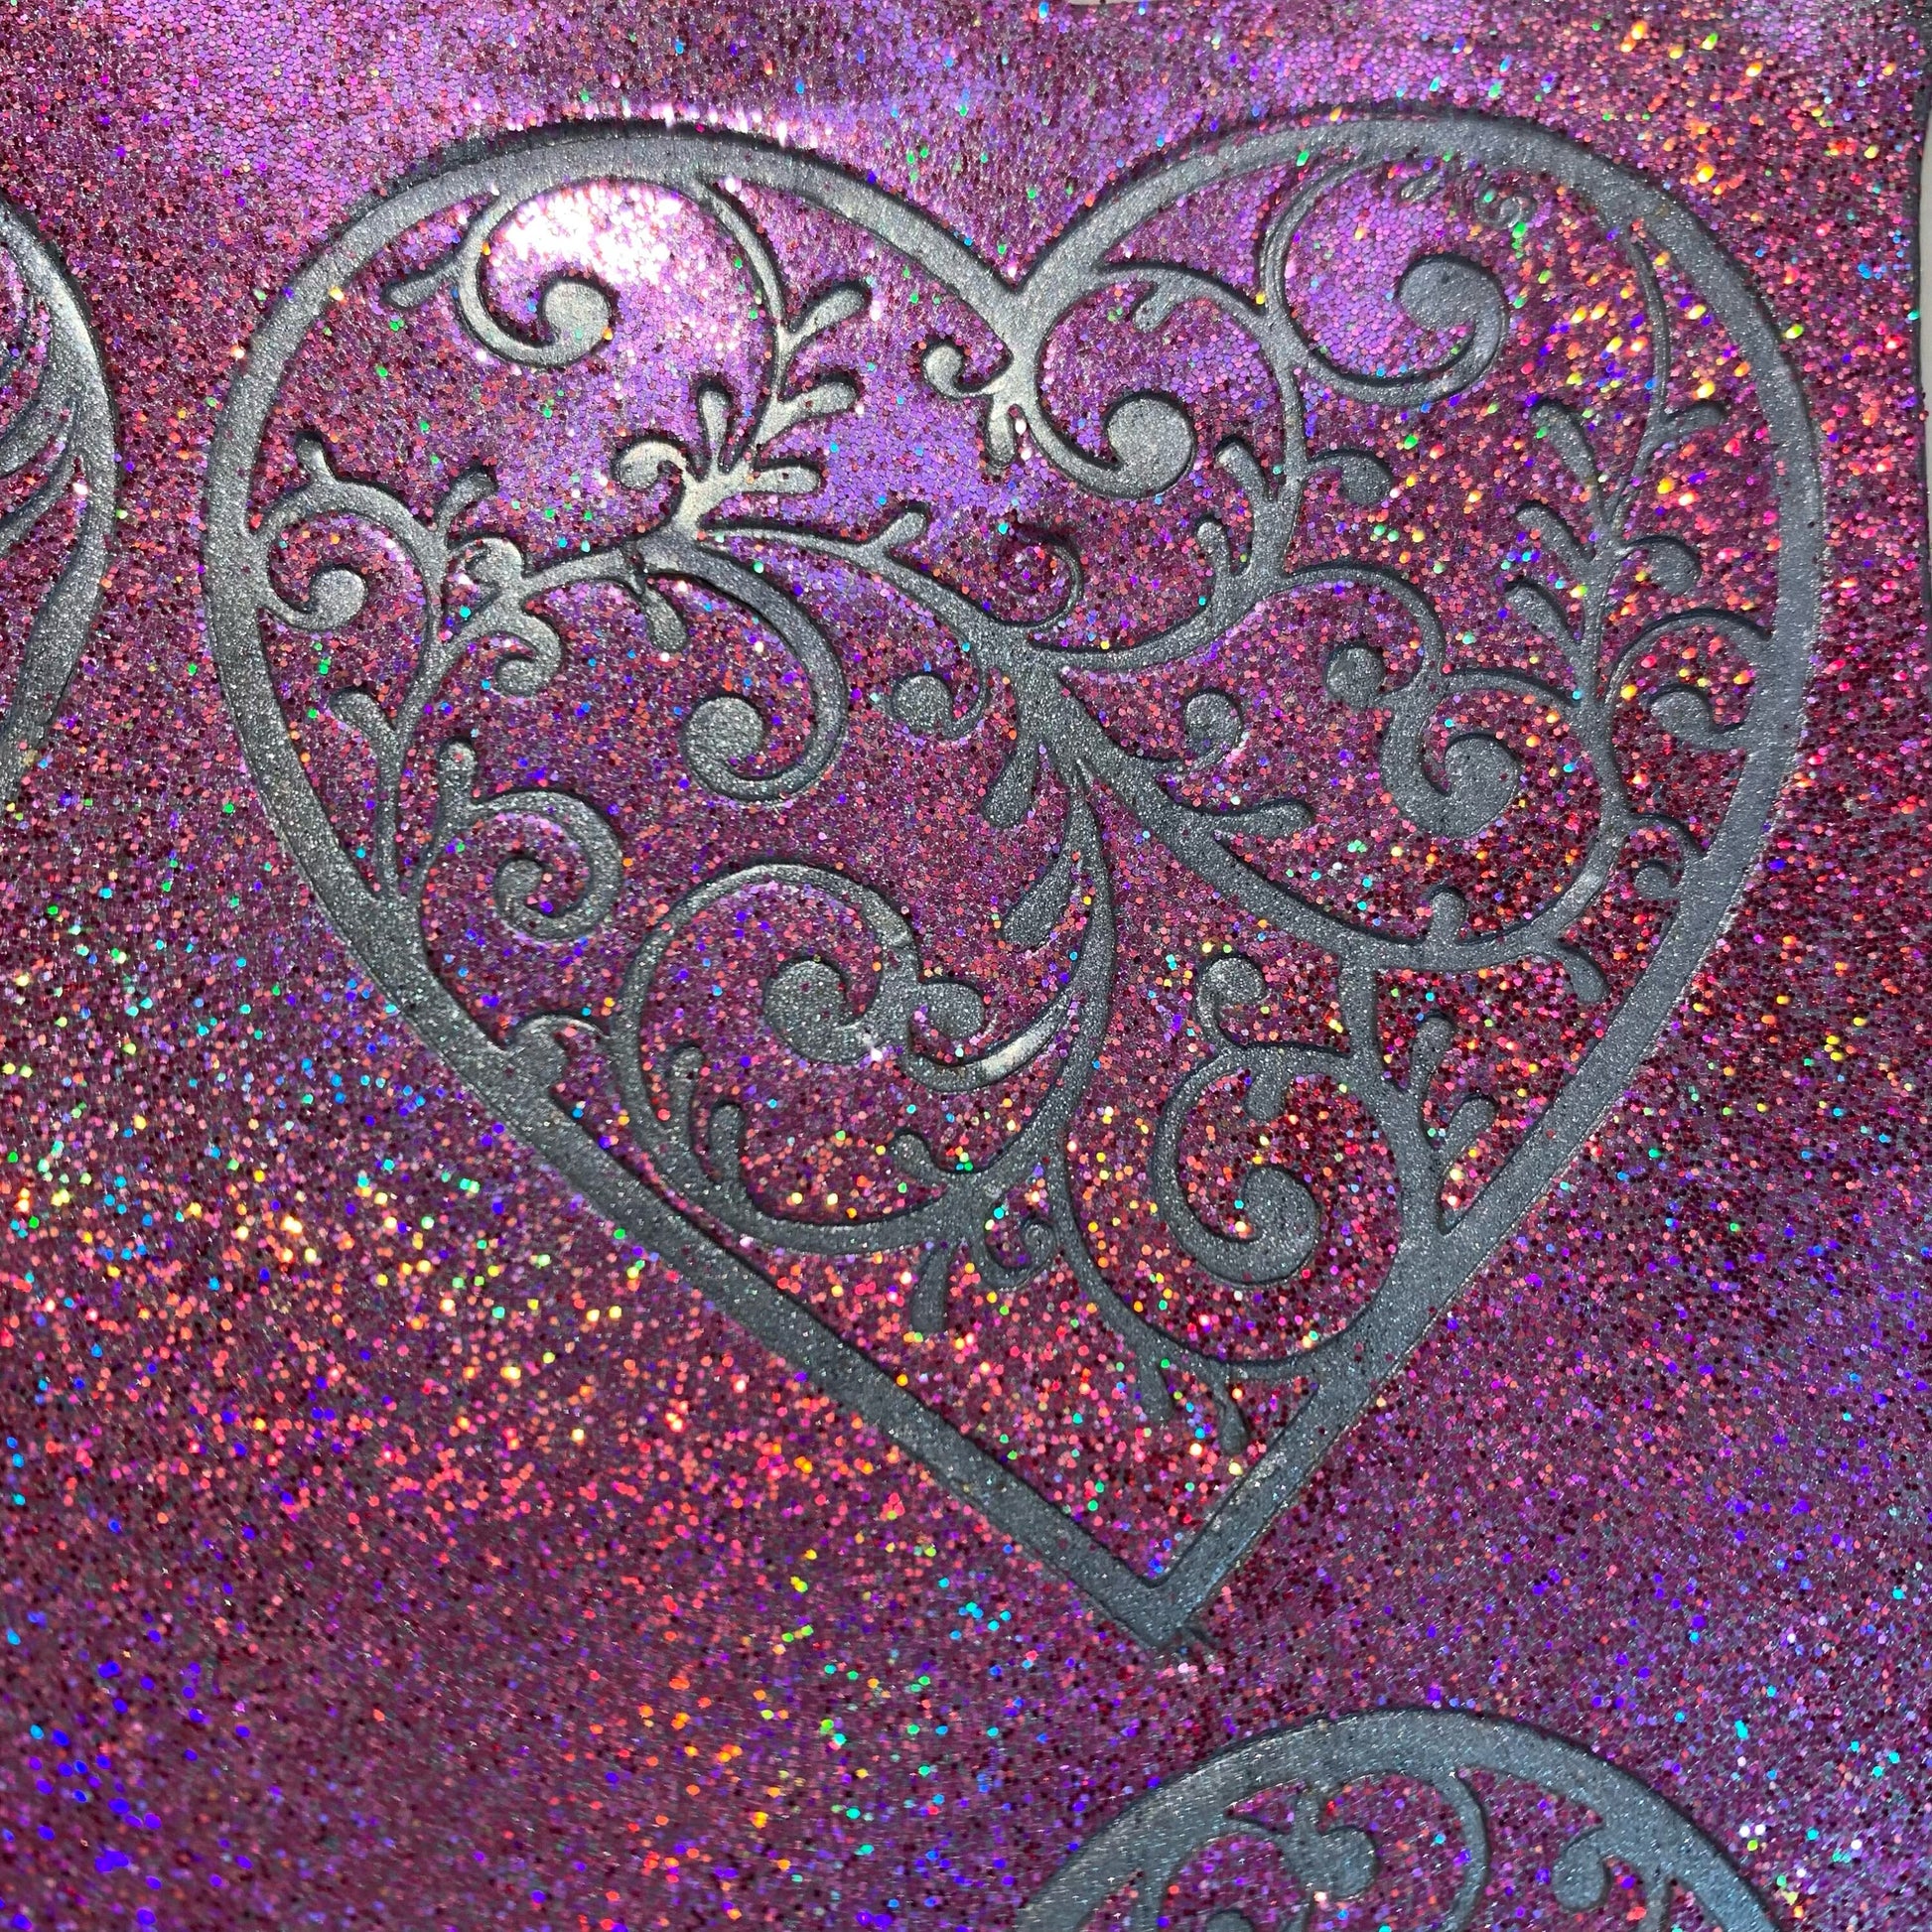 Polymer Clay Crafting Stencil Lovely Hearts 4 designs for earrings decor art journal and mixed media gelli art | Valentine's Day crafting